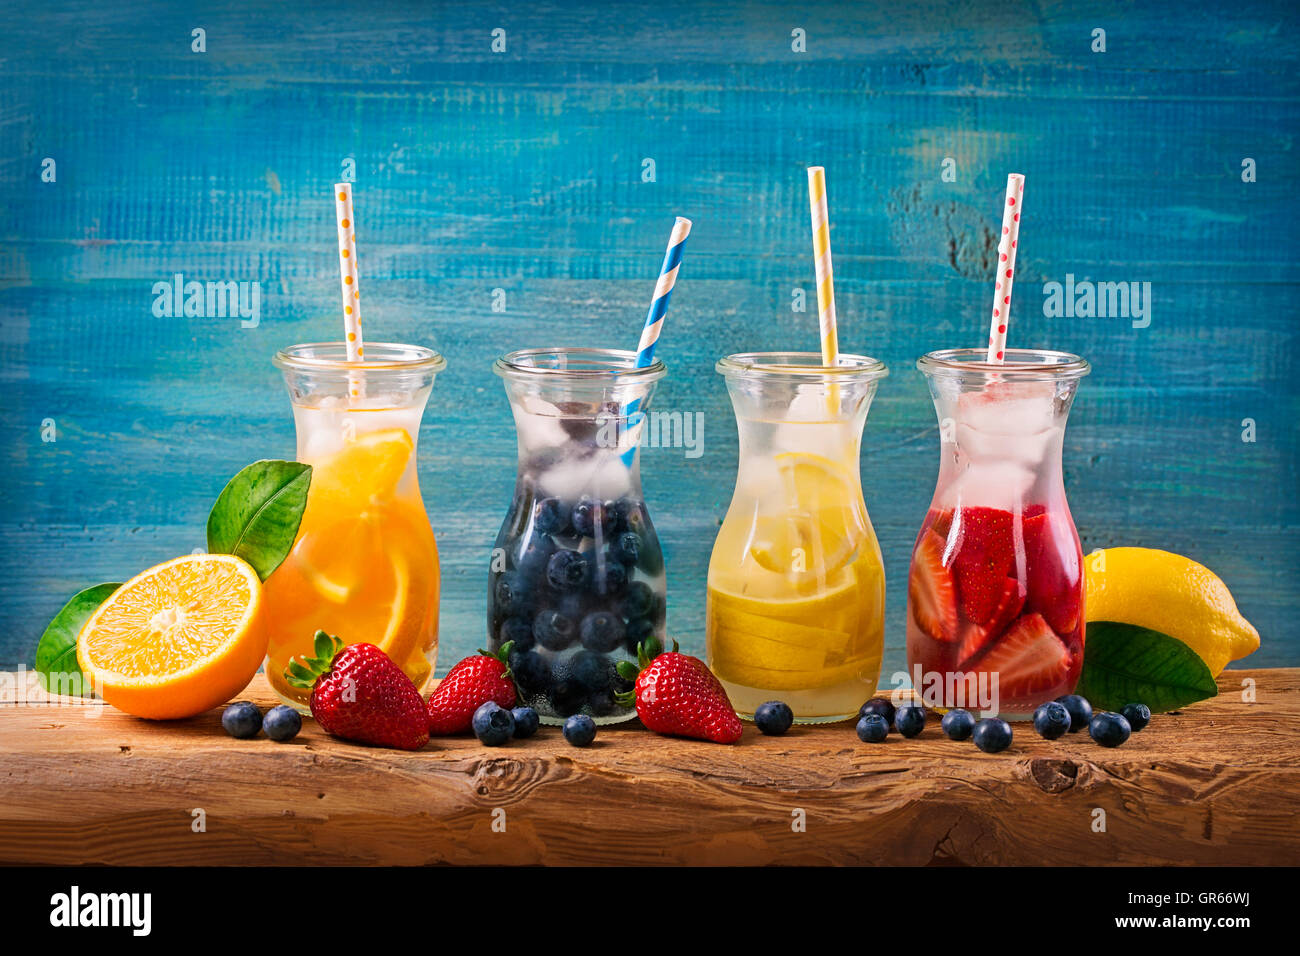 Summer fruit drinks on a wooden table Stock Photo